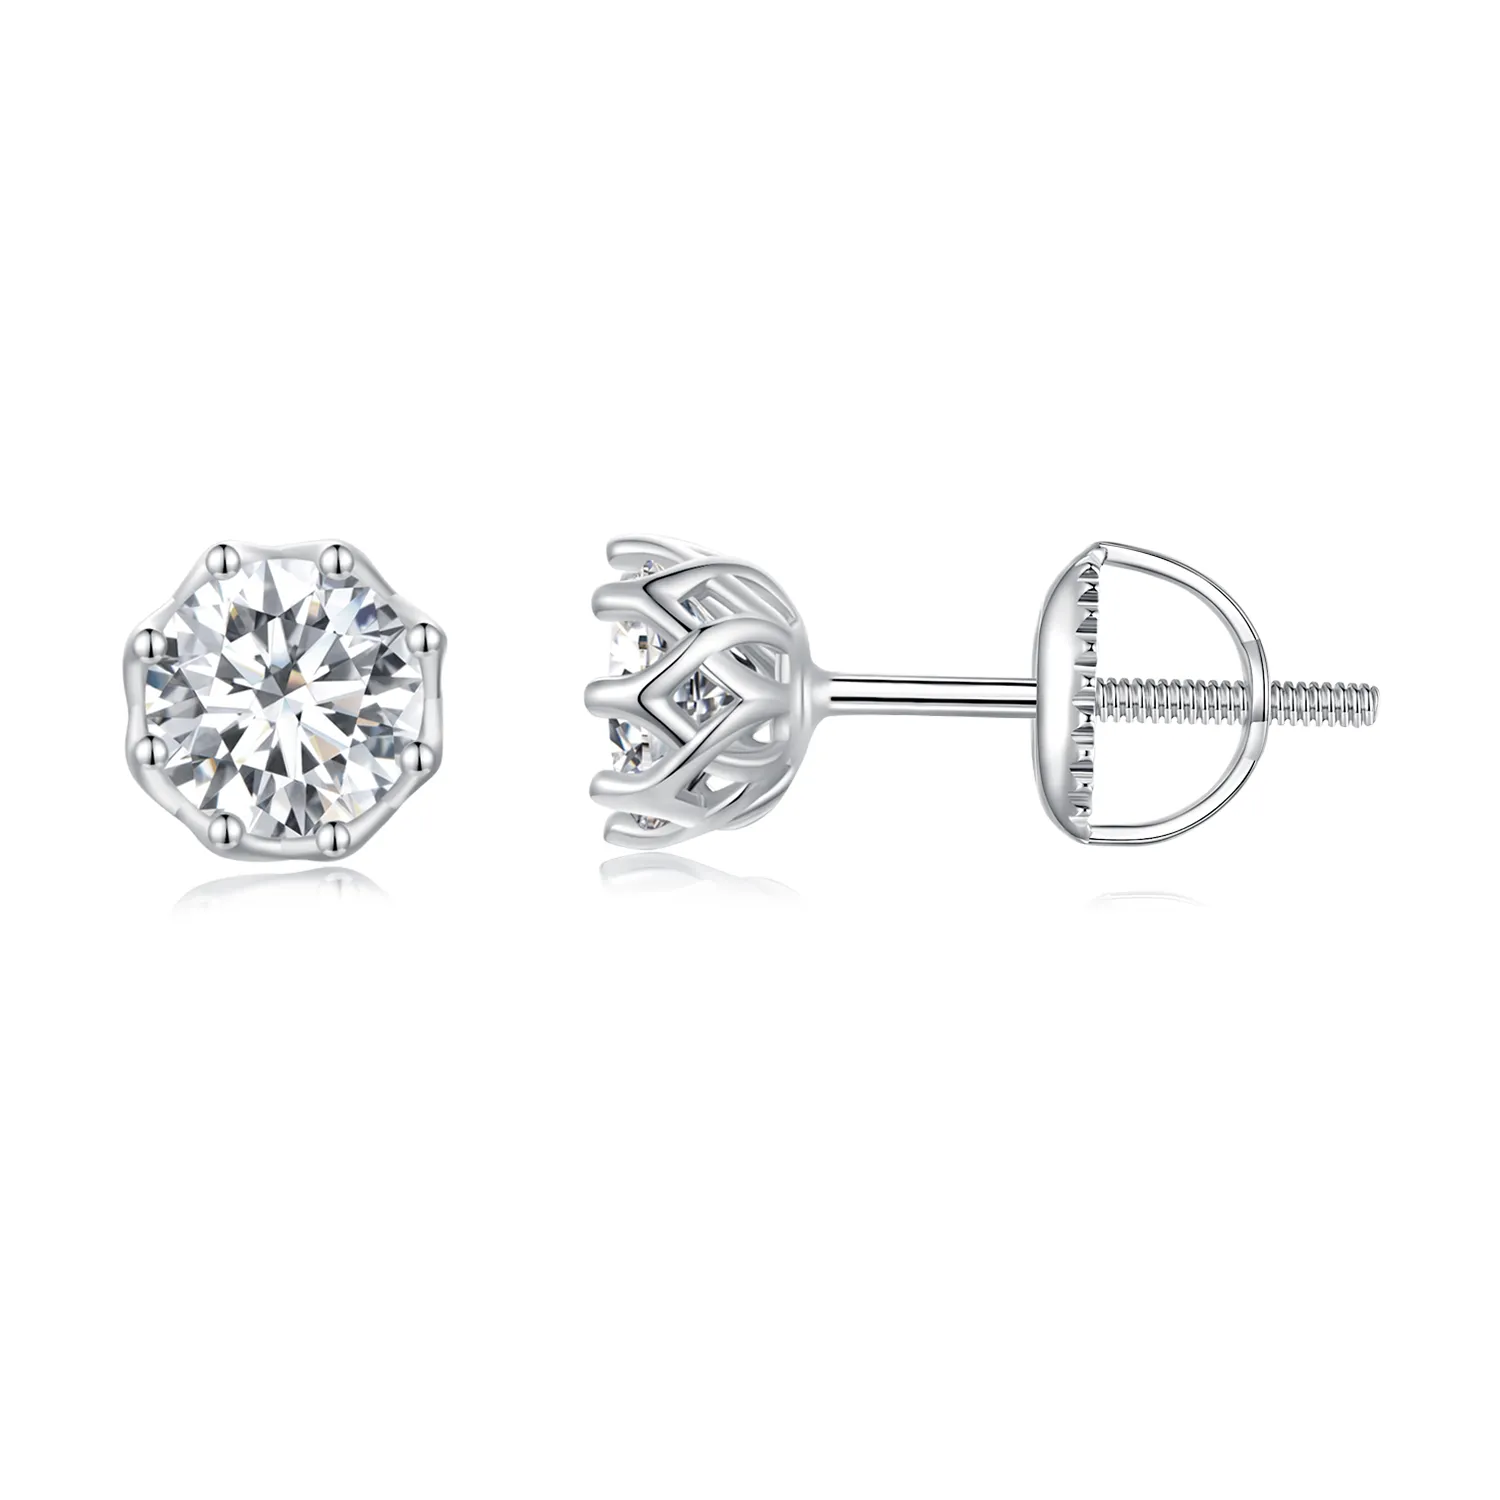 Pandora Style Exquisite Moissanite Studs Earrings(Two Certificates) - MSE016-S